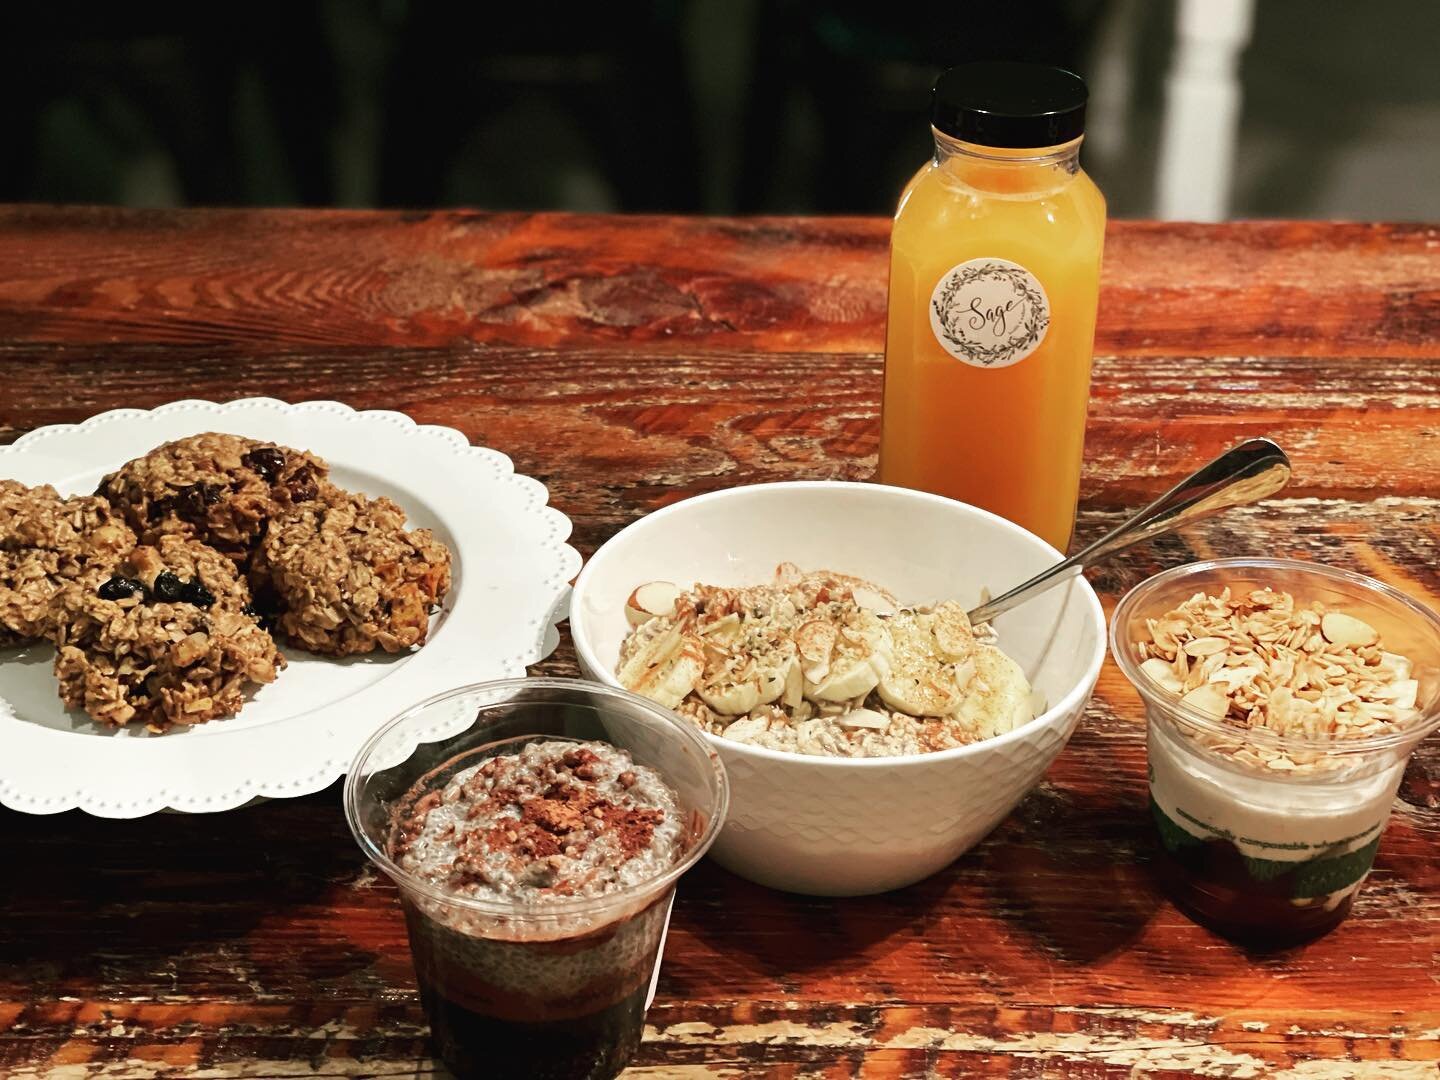 ☀️Good morning Sunshine☀️ Sage is upping our breakfast game. There&rsquo;s no better way to fuel your day than with these plant based whole food, gluten free, dairy free and  refined sugar free options. Have you tried @cocojune_organic yogurt yet? We